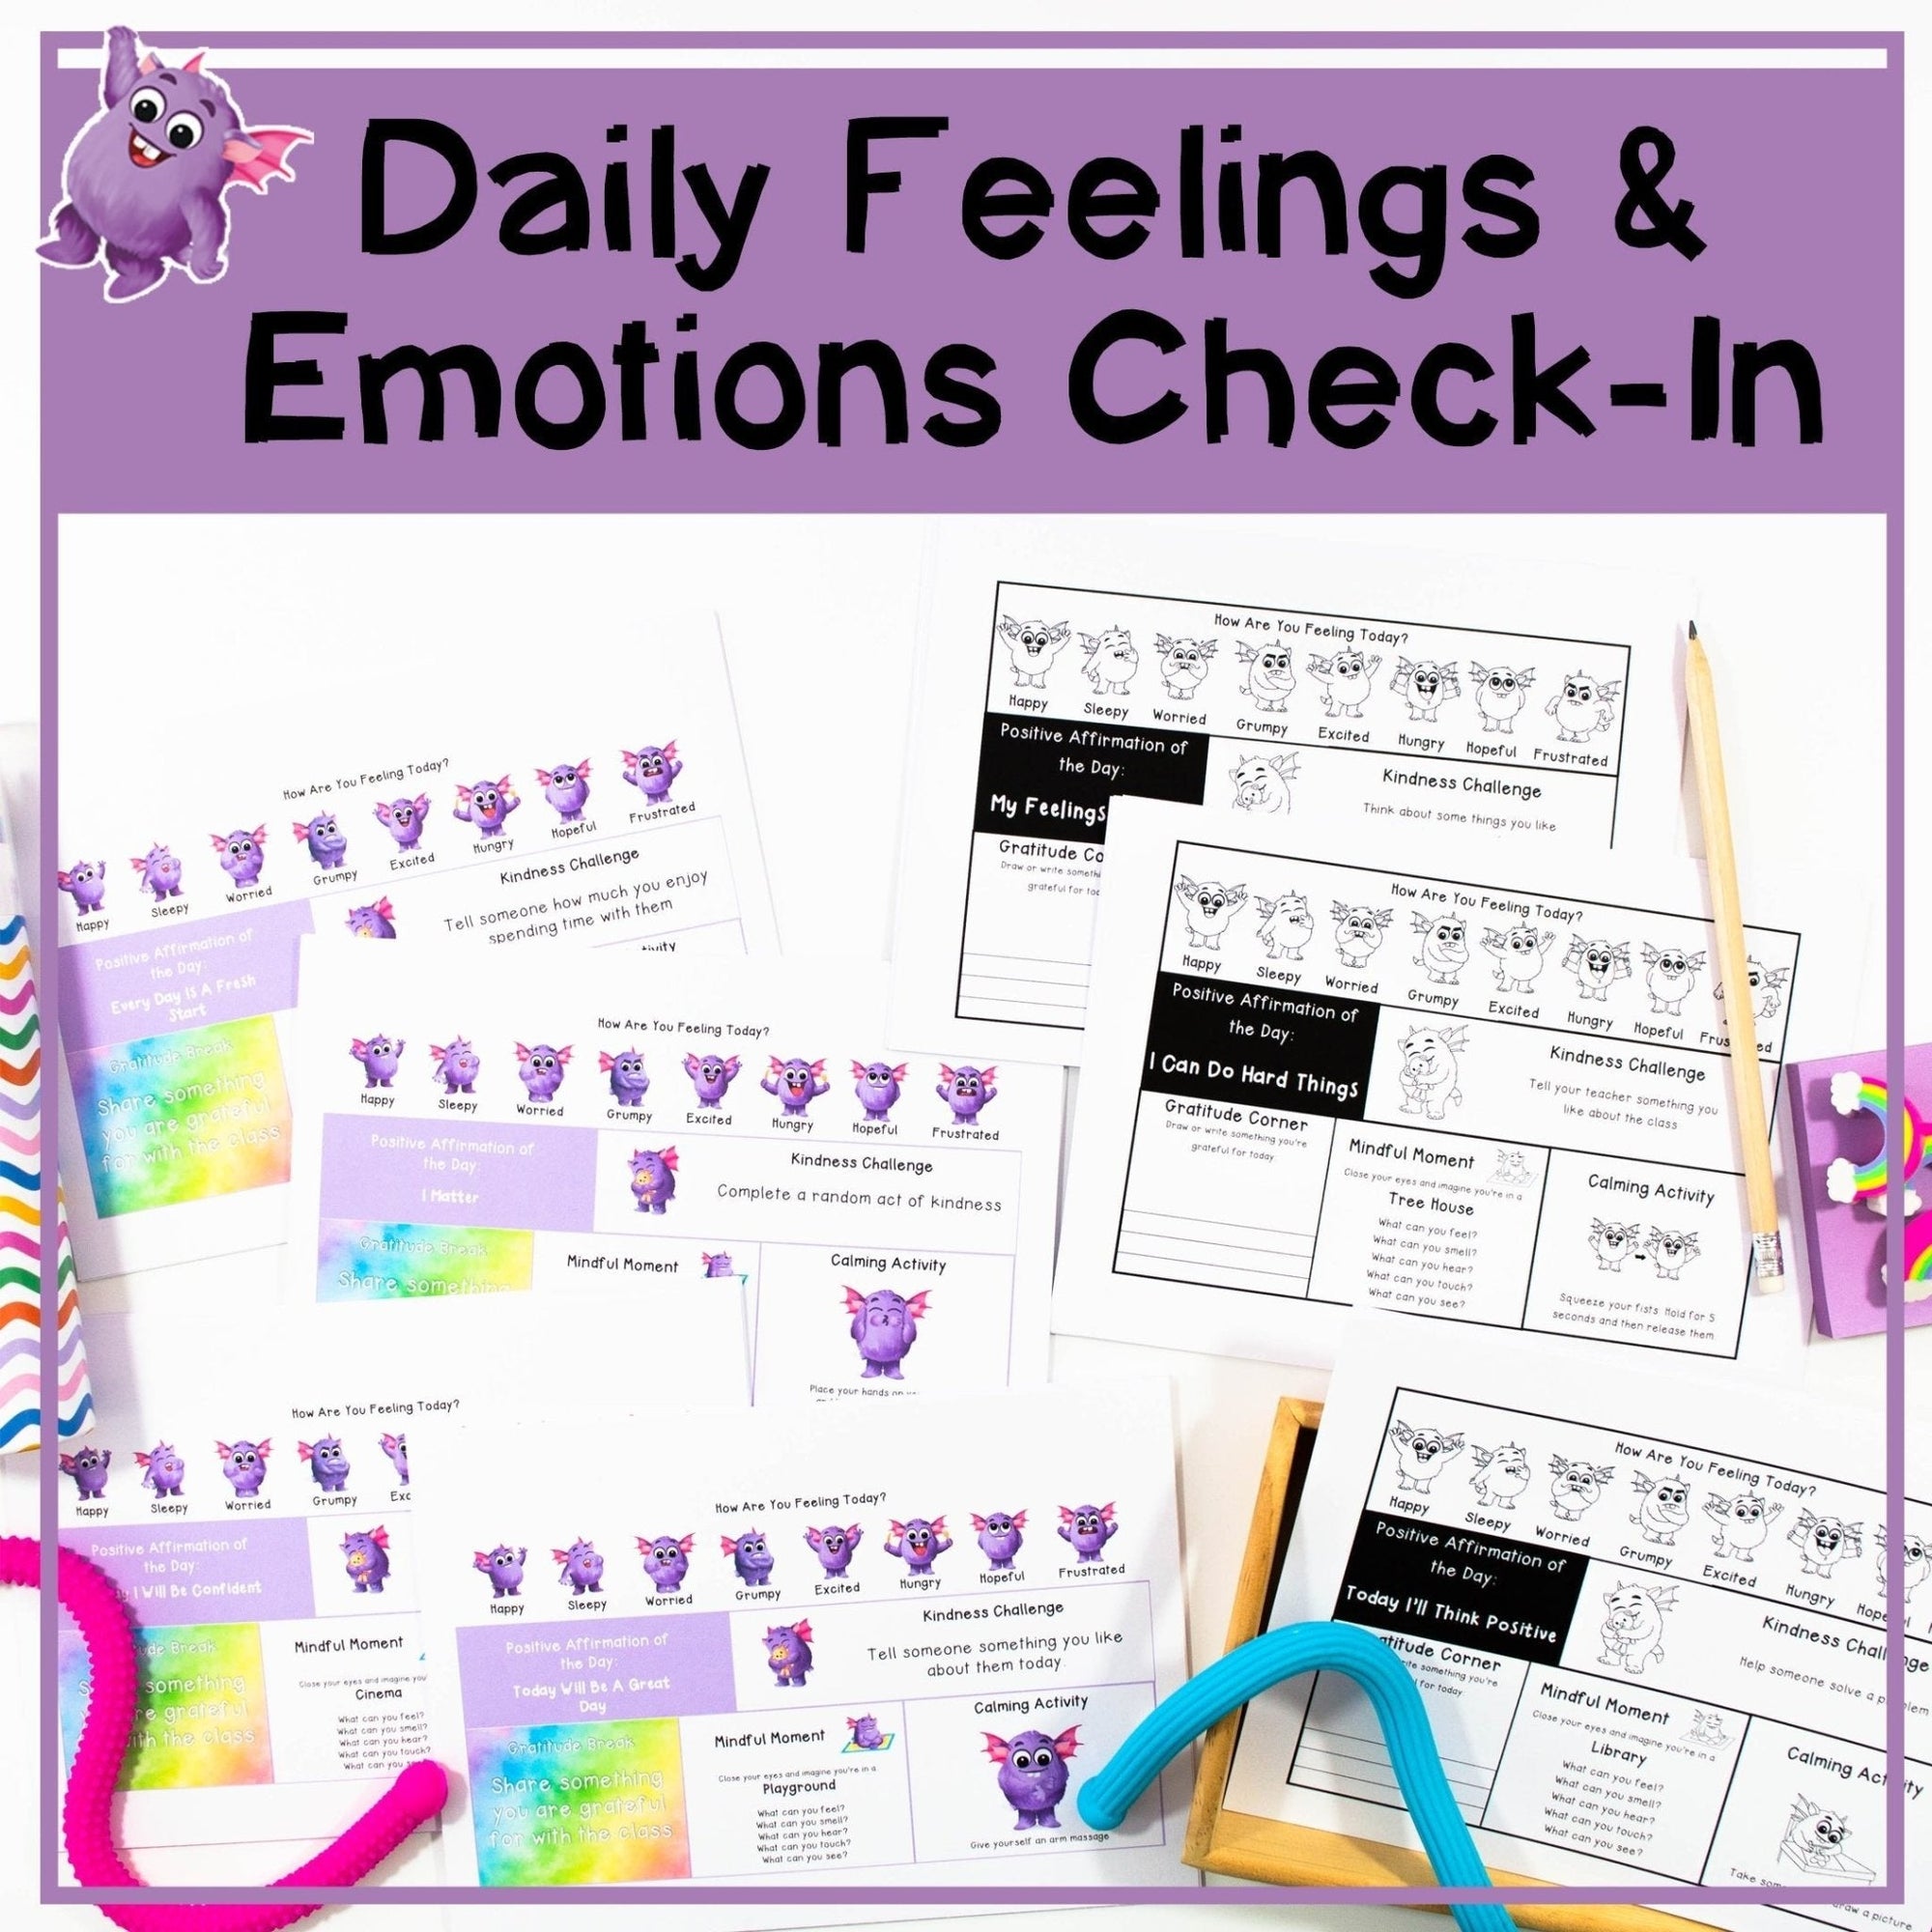 Daily Feelings & Emotions Check In Chart - Mindfulness Printable & Powerpoint - Your Teacher's Pet Creature